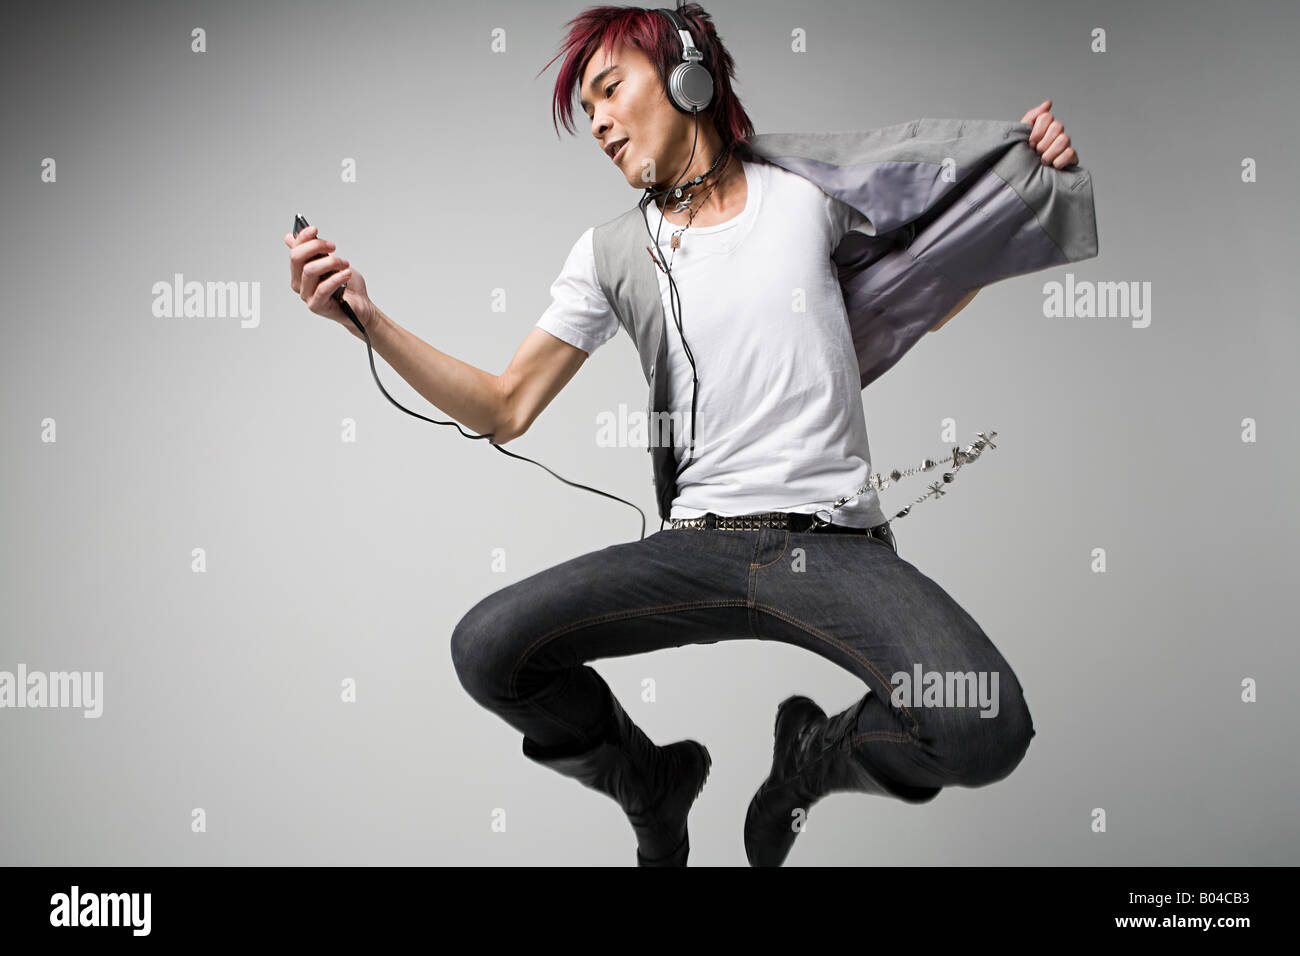 Japanese man listening to mp3 player Banque D'Images